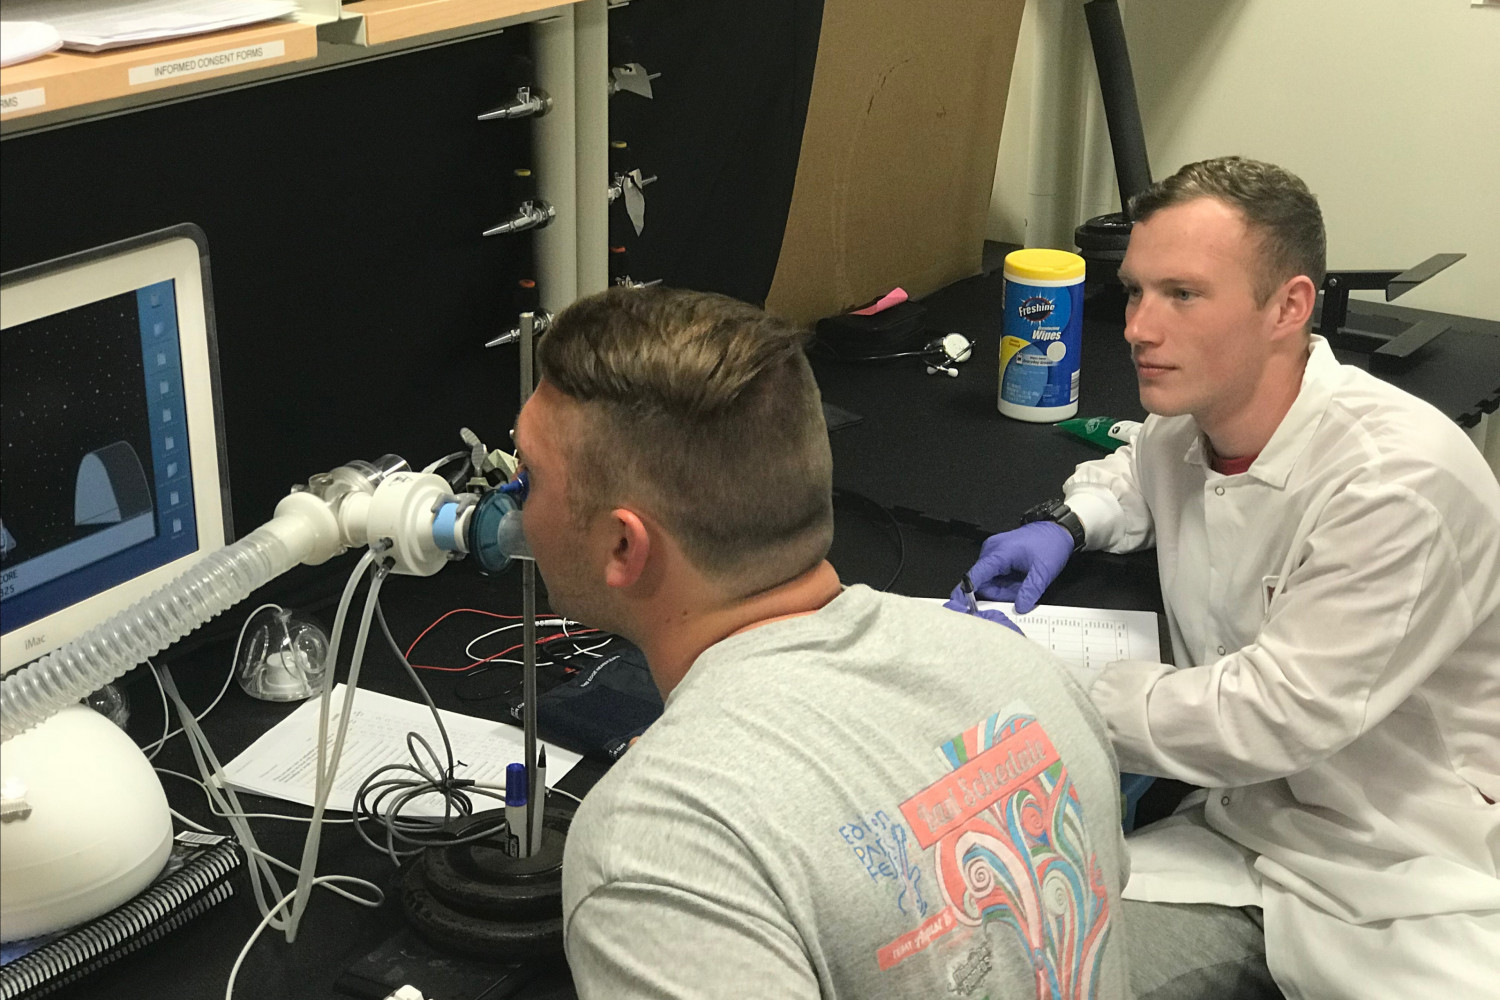 Carthage biology majors gaining hands-on research experience in the neurophysiology laboratory.